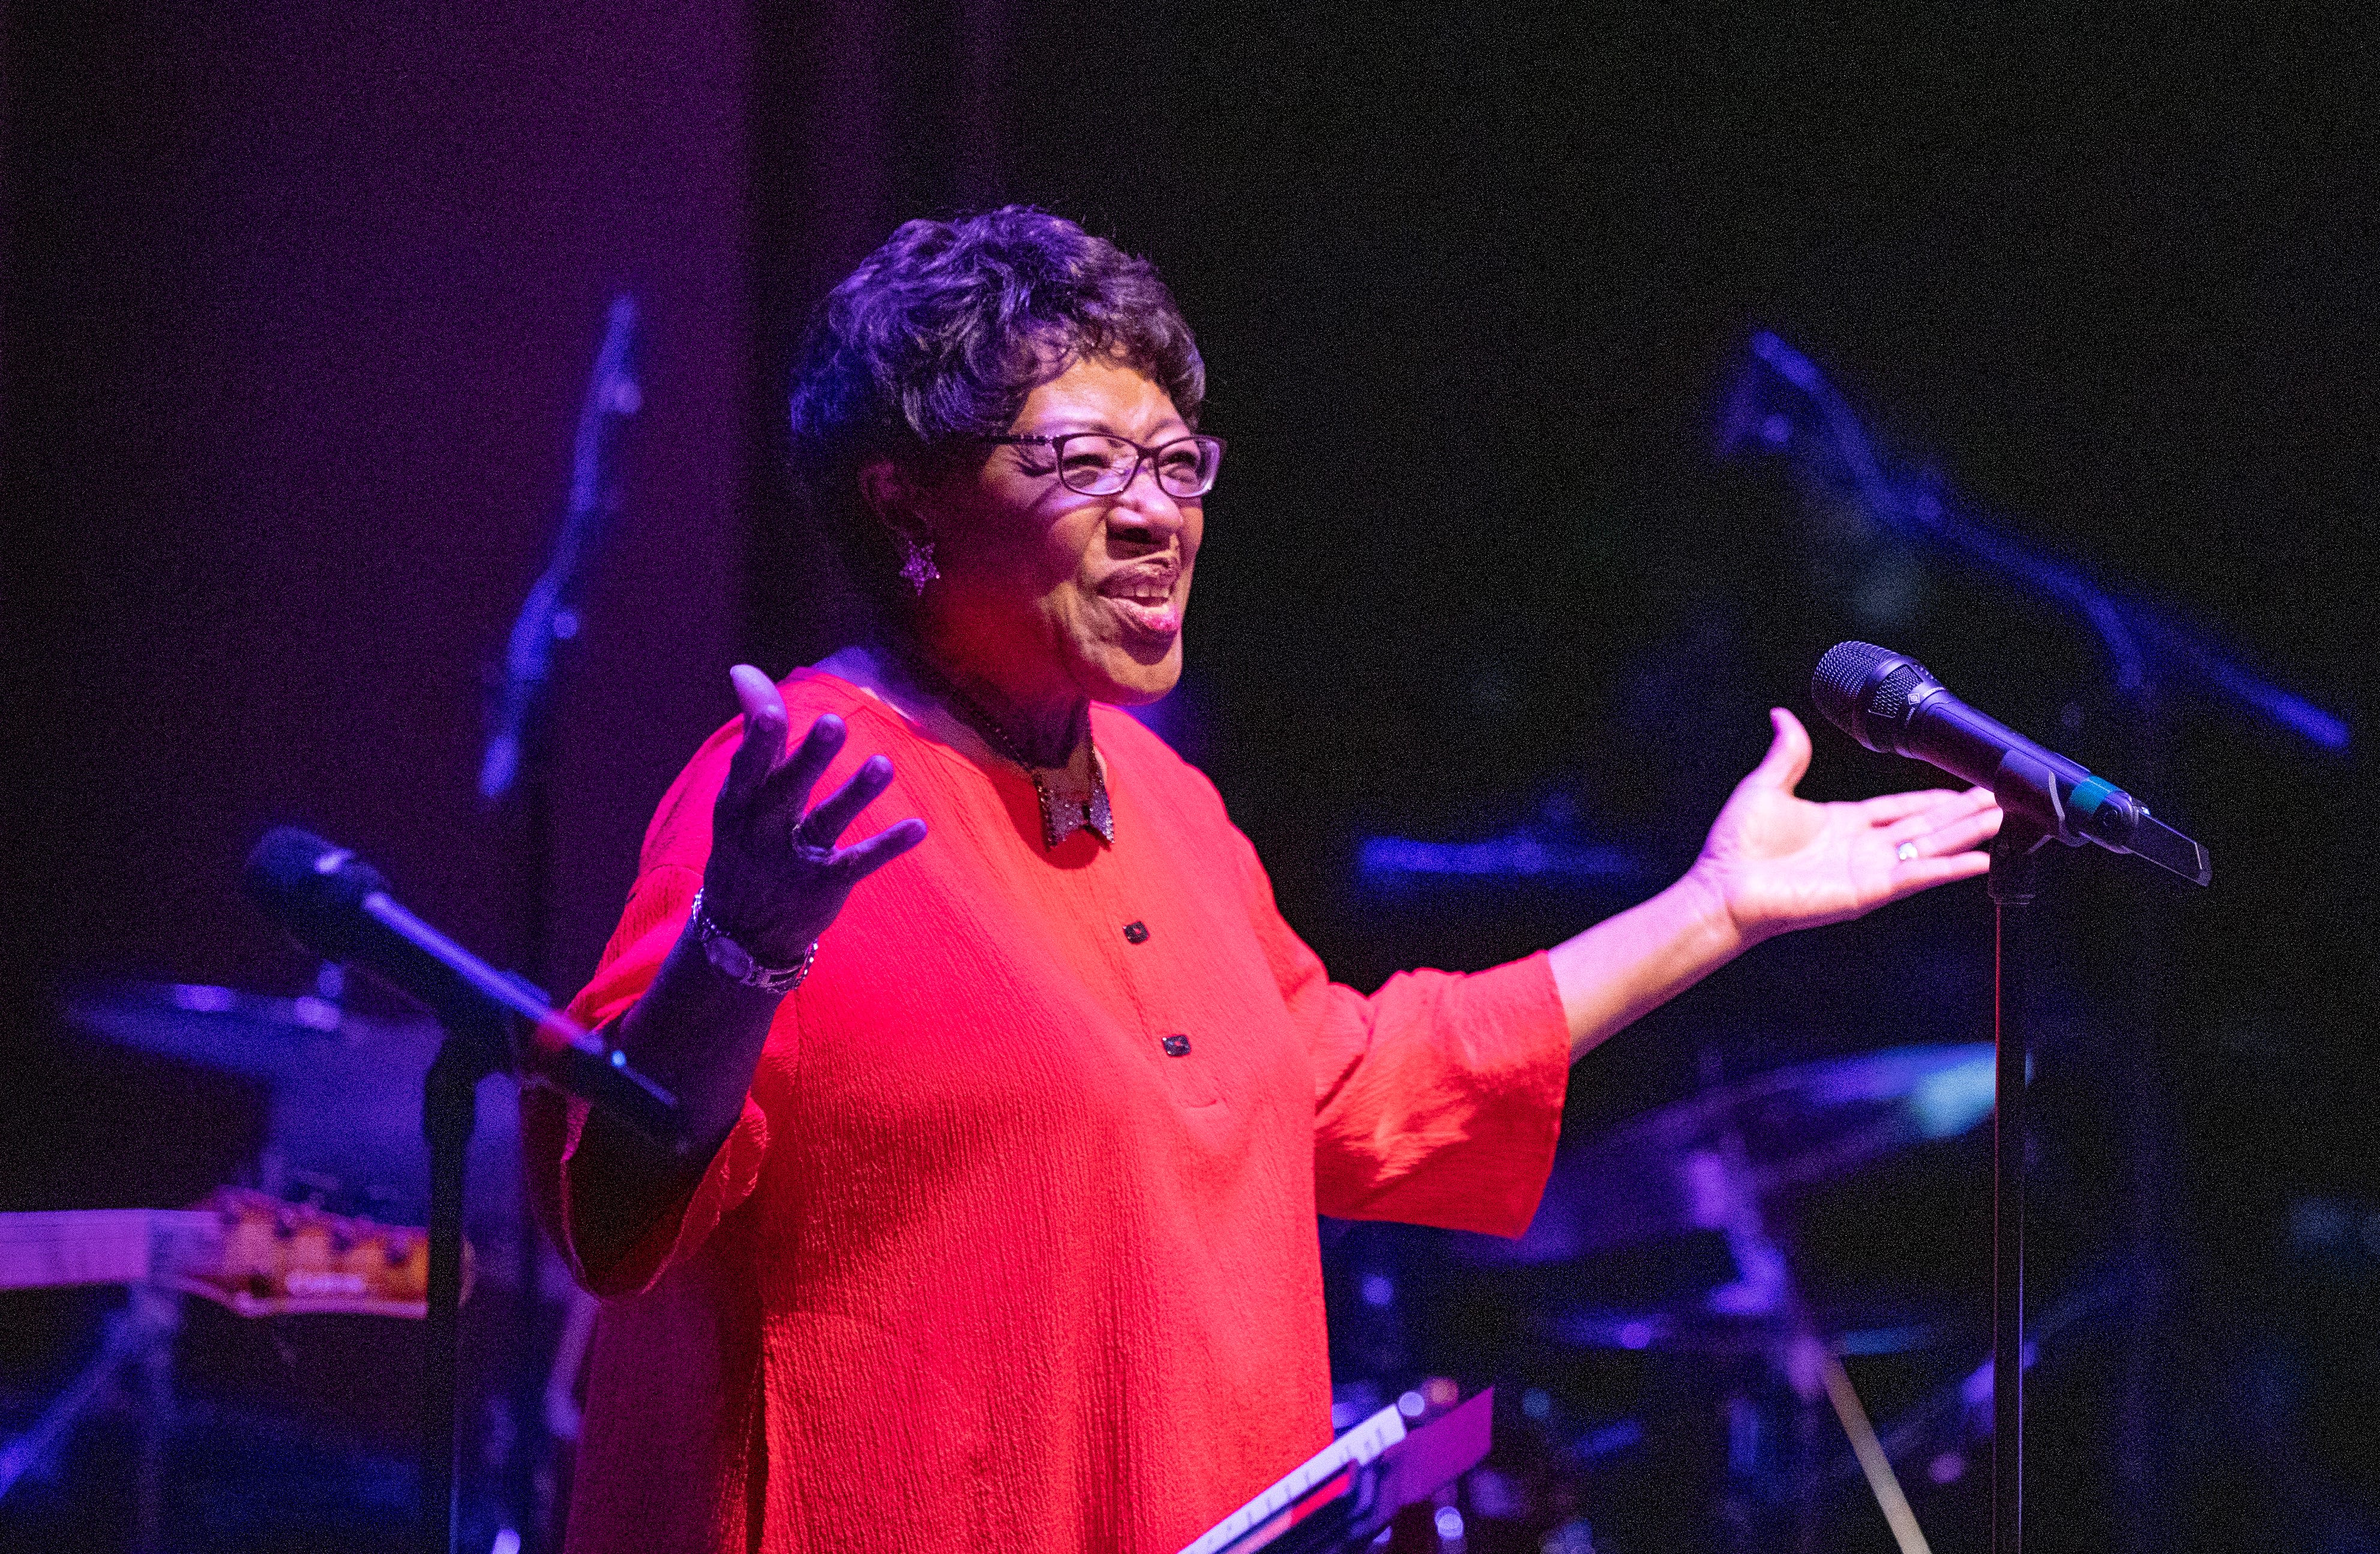 Lyle Lovett surprises Phoenix legend Francine Reed with birthday message: 'We love you'